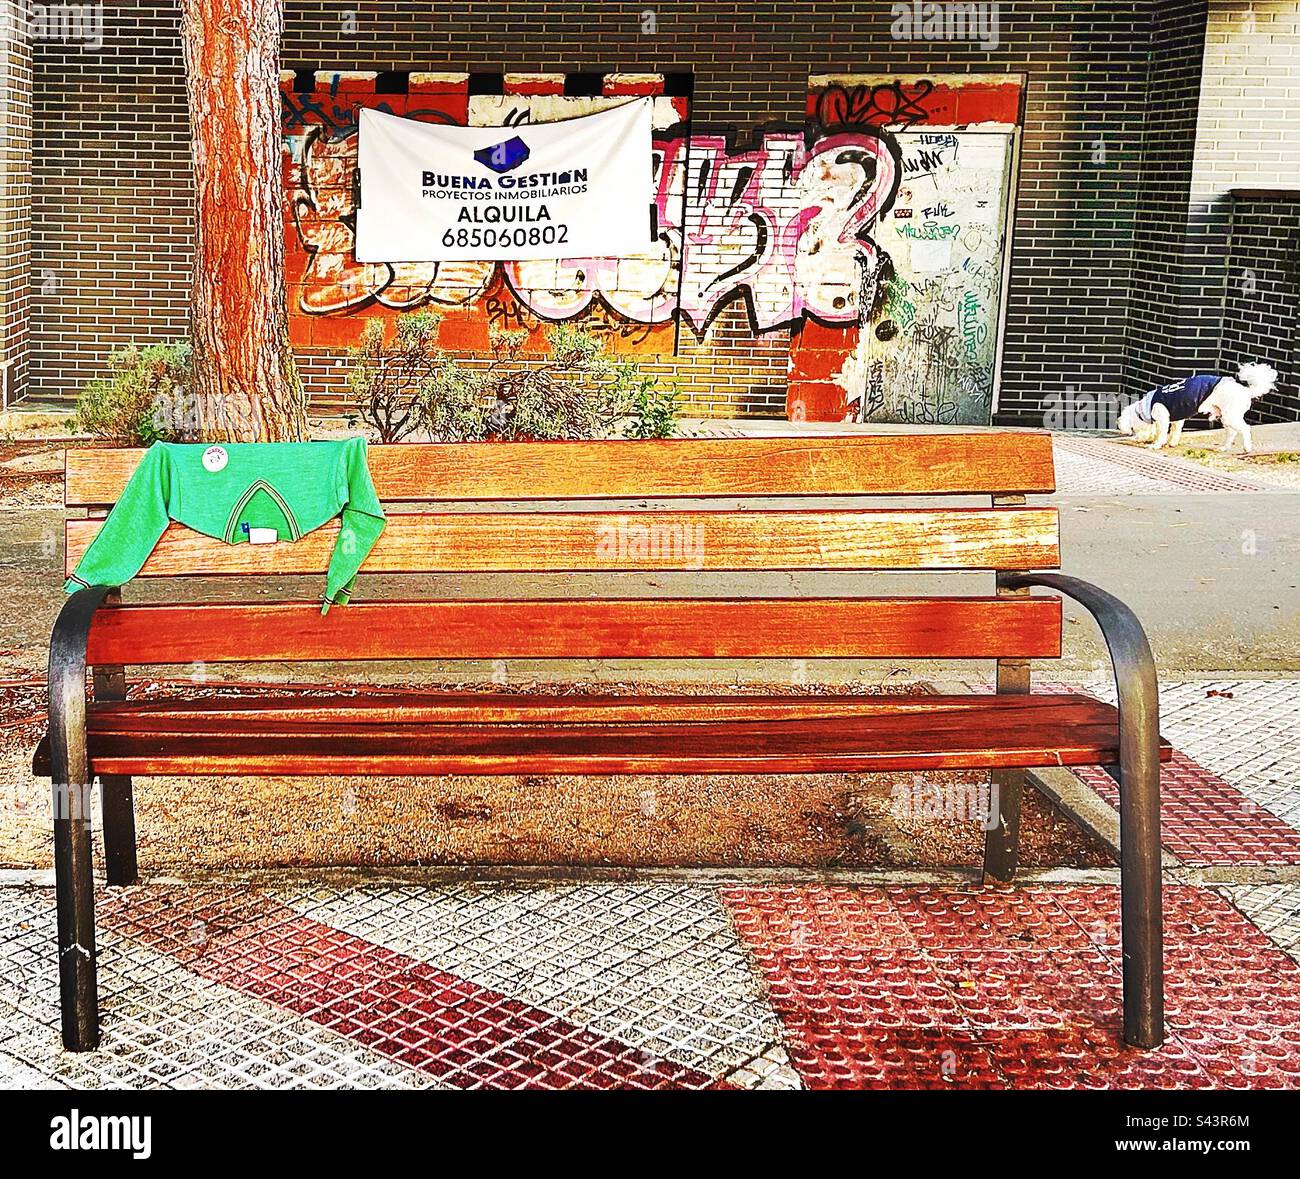 The green pullover of an infant child is carefully draped over a bench in the street, presumably close to the place where it was lost. Stock Photo